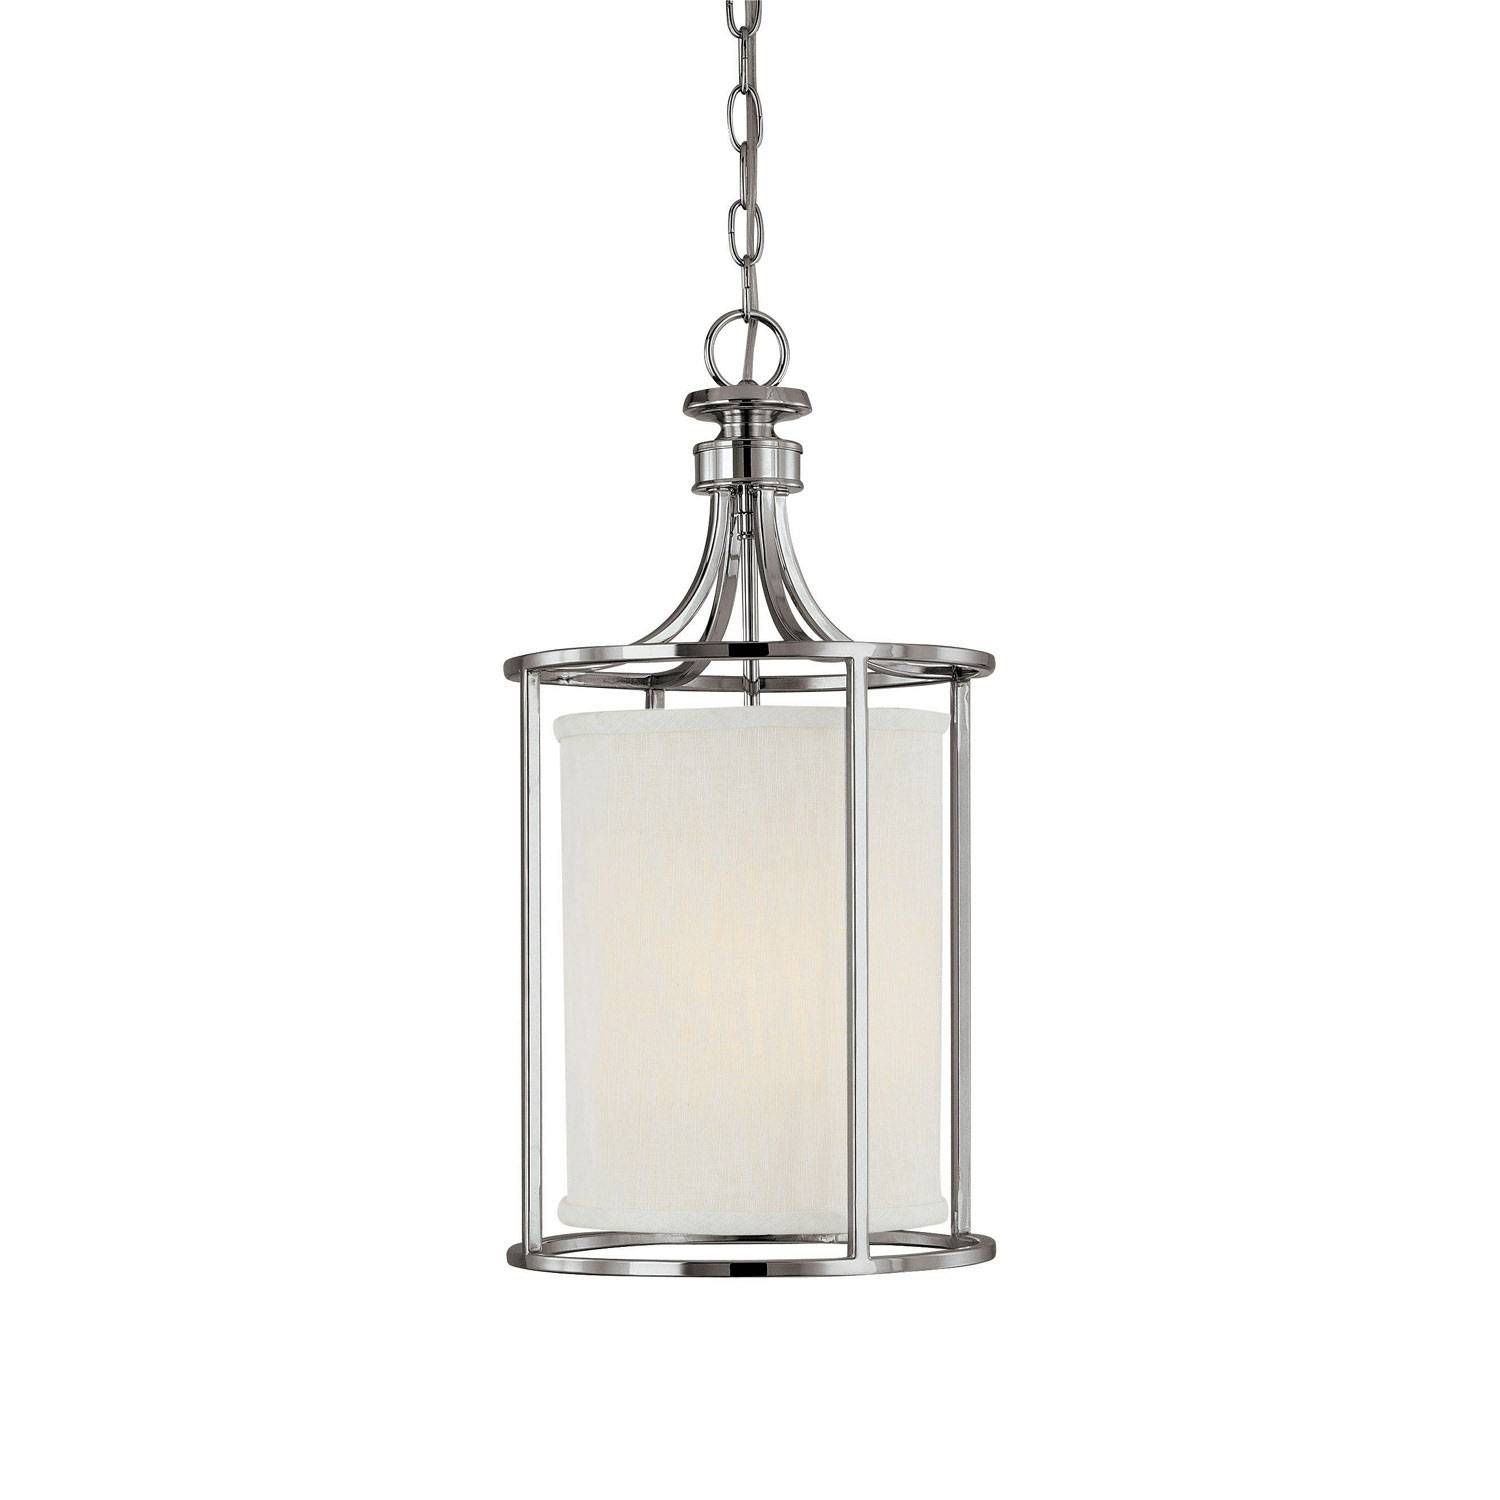 Capital Lighting Fixture Company Midtown Polished Nickel Two Light Intended For Polished Nickel Pendant Lights Fixtures (View 15 of 15)